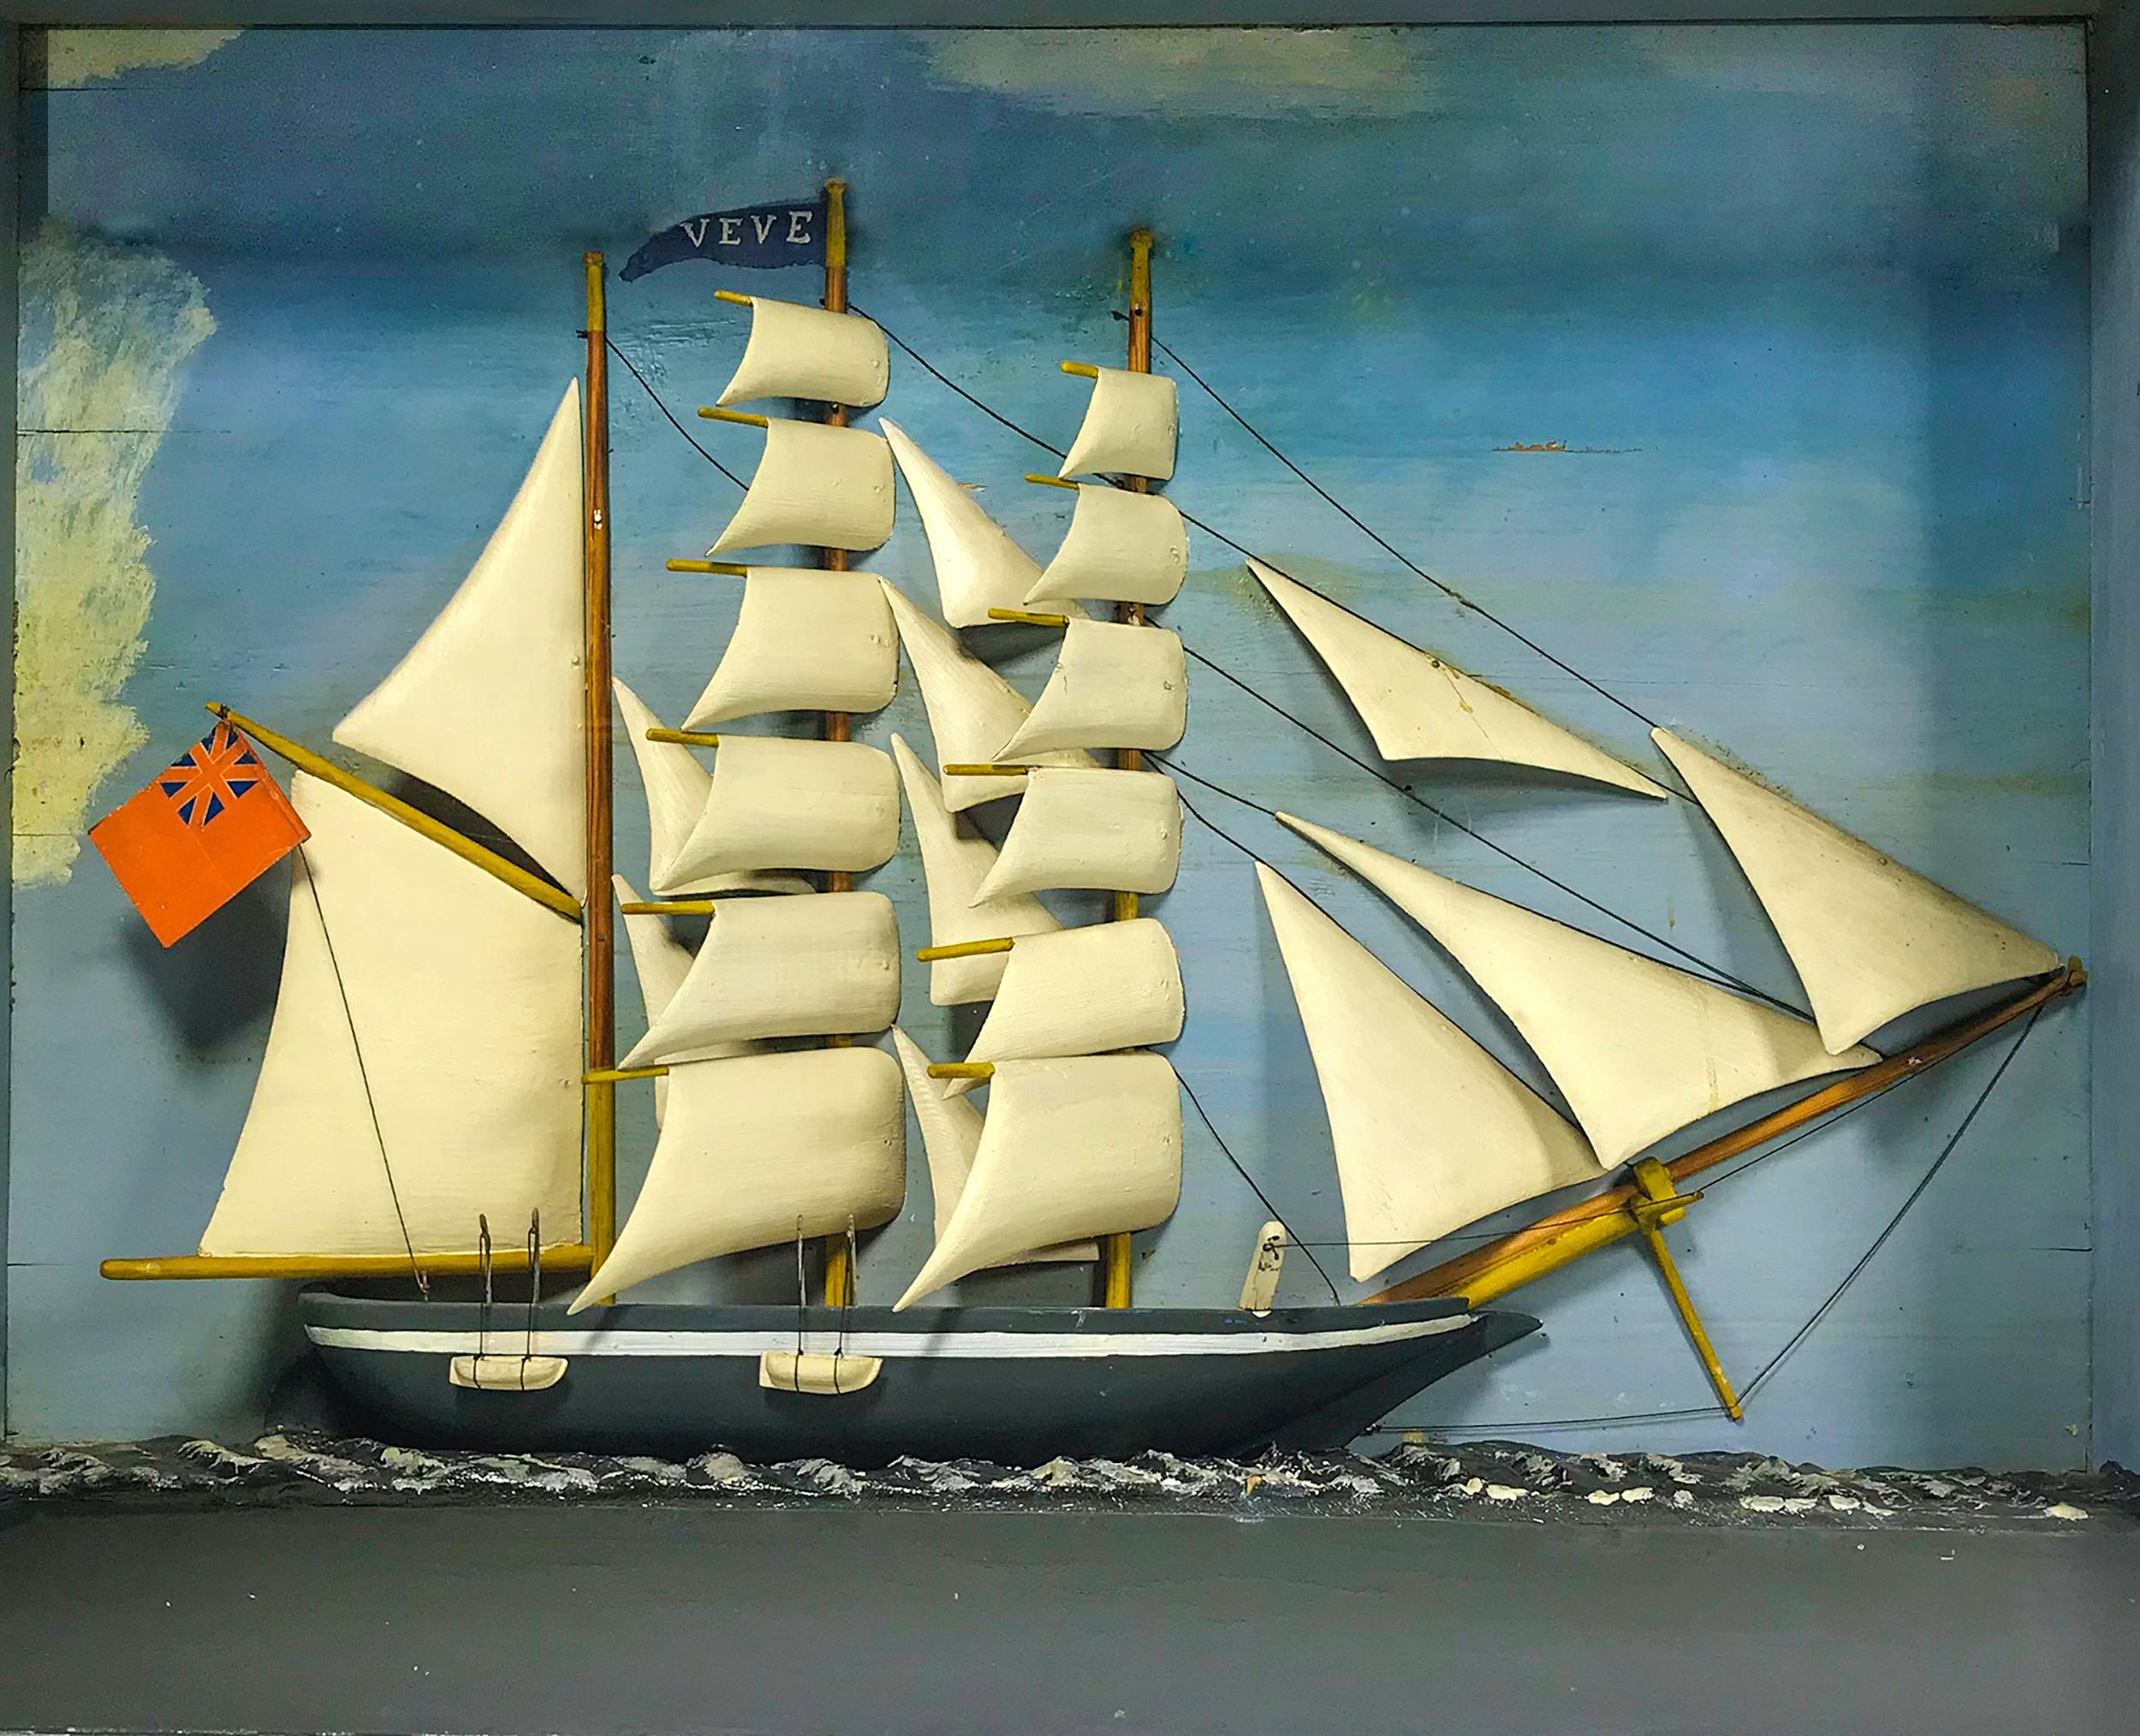 Of the three mast schooner “Veve”, carved hull
and sails. Hanging the British flag with painted
backboard and mounted on a wooden base with
painted plaster see. The frame is grain painted
yellow and brown, English, circa 1890-1910.
Measures: